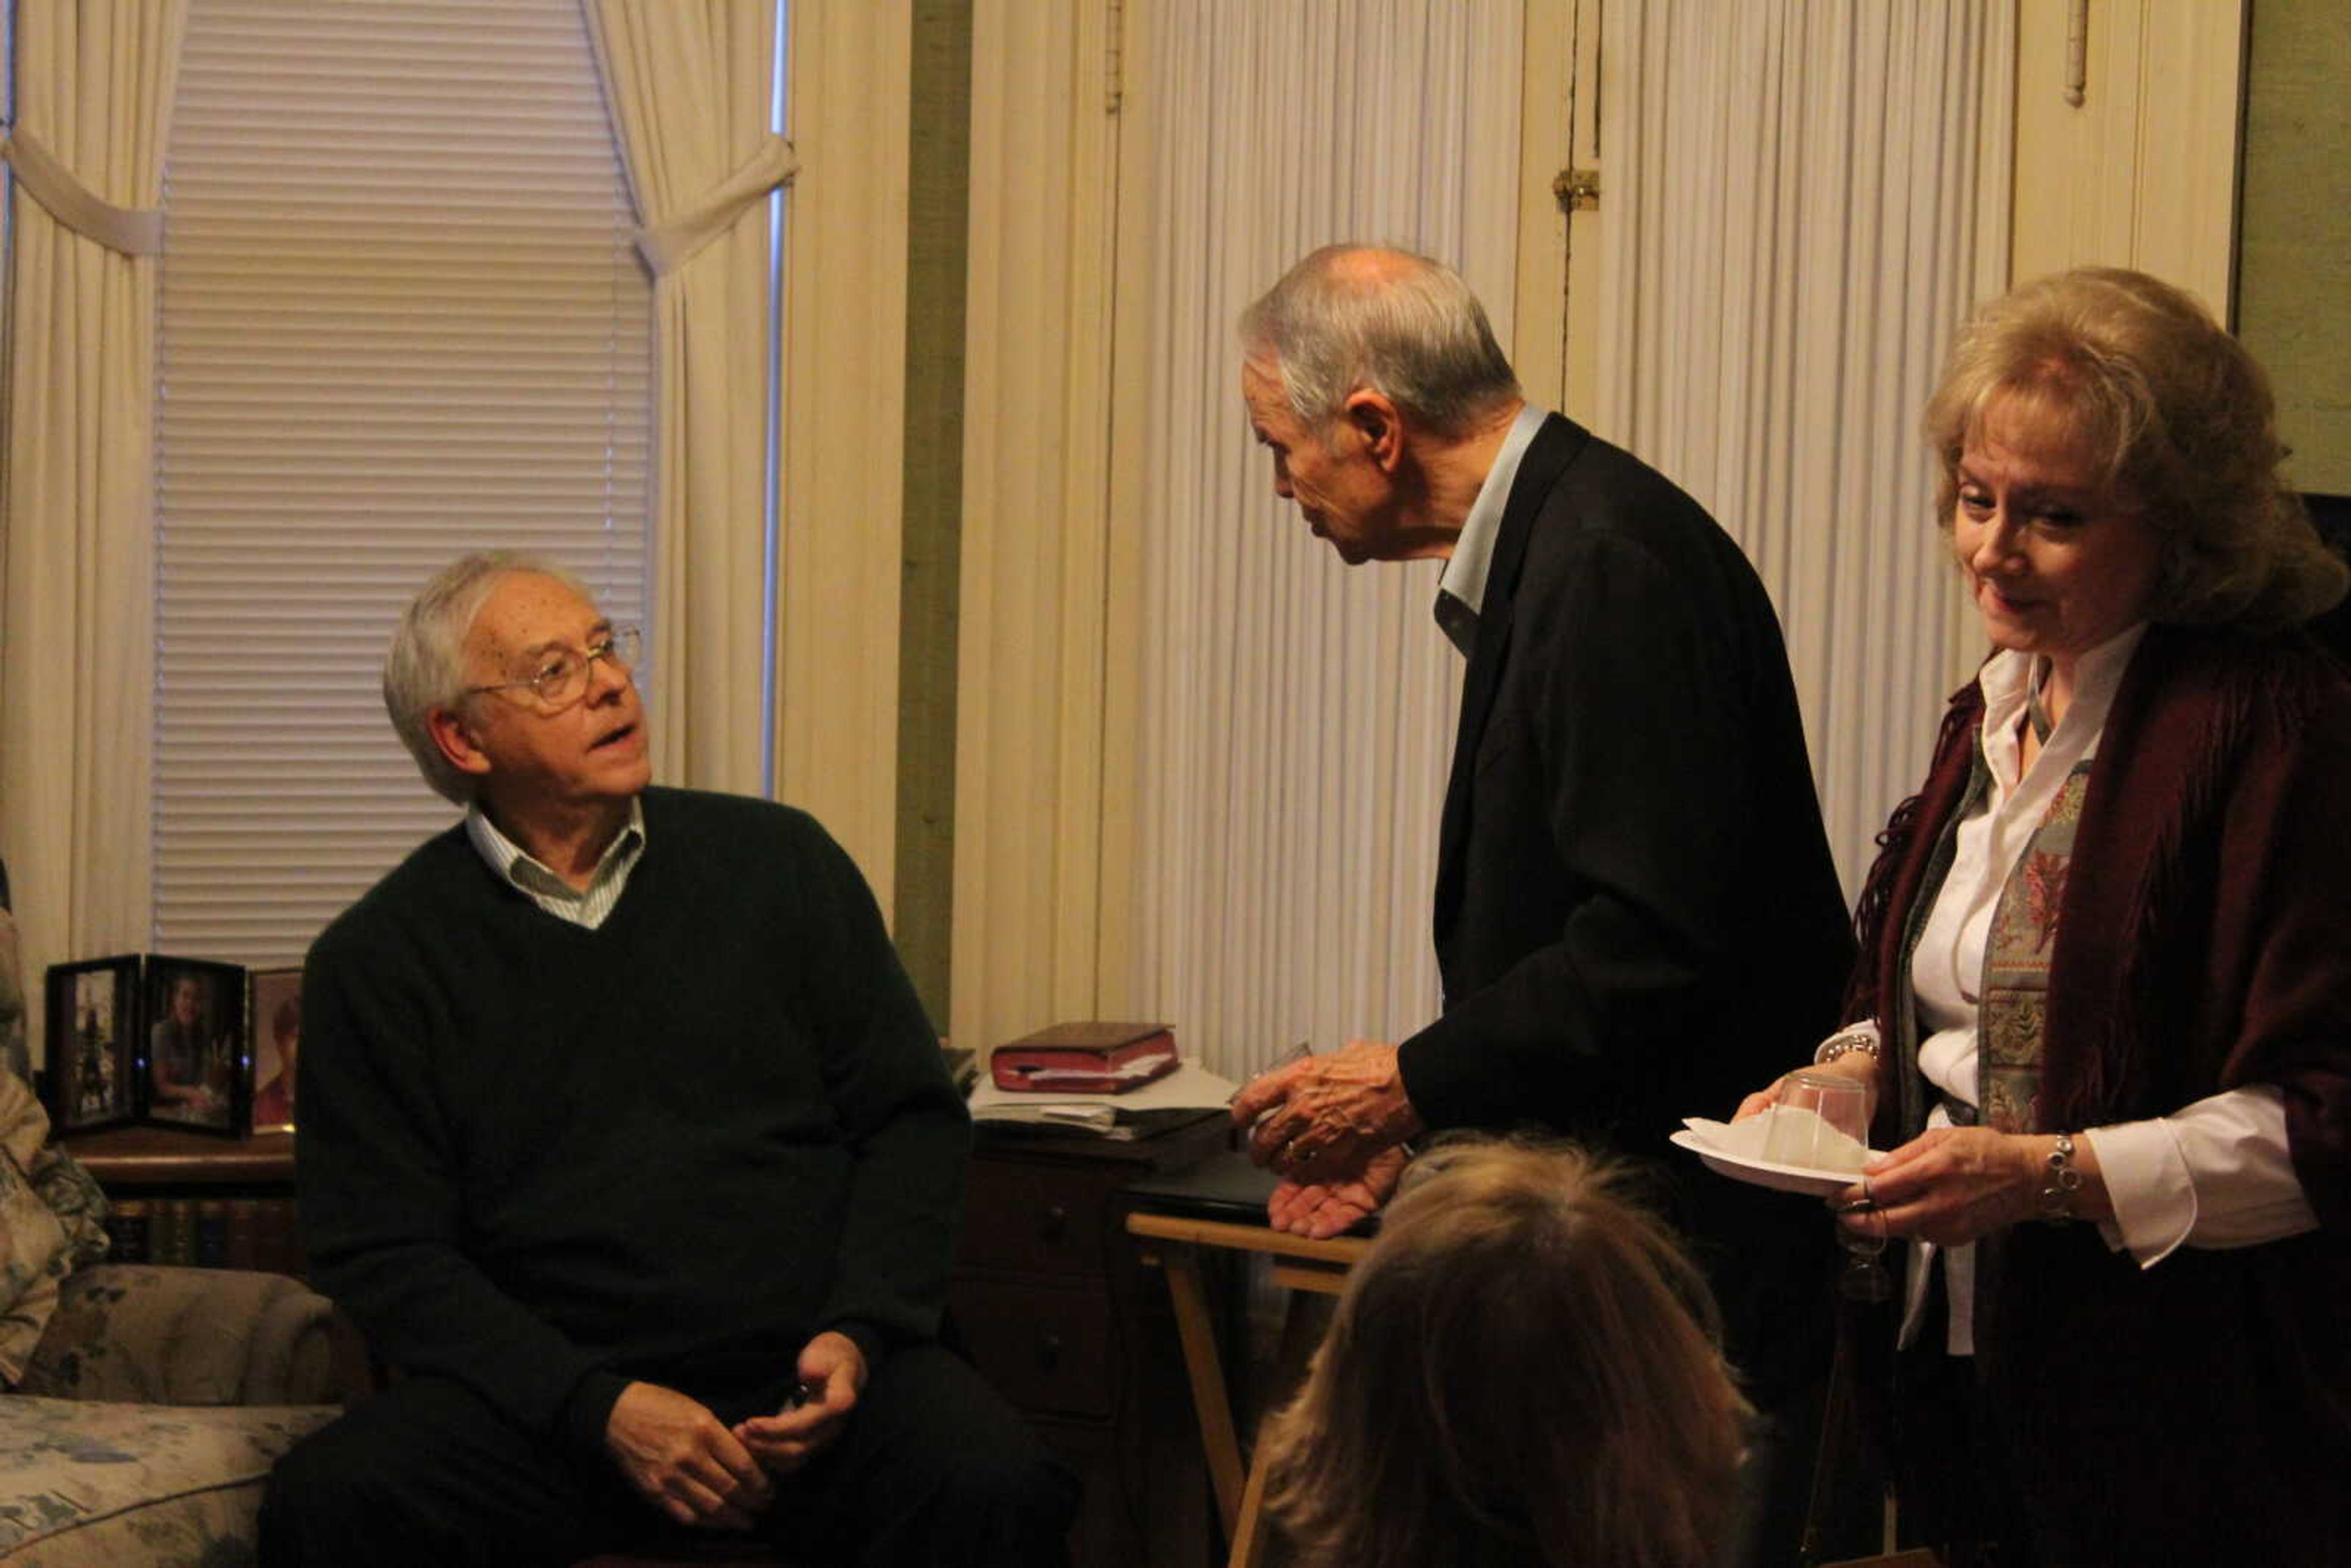 Dr. Robert Hamblin conversing with guest at the book launch reception on Nov. 8.